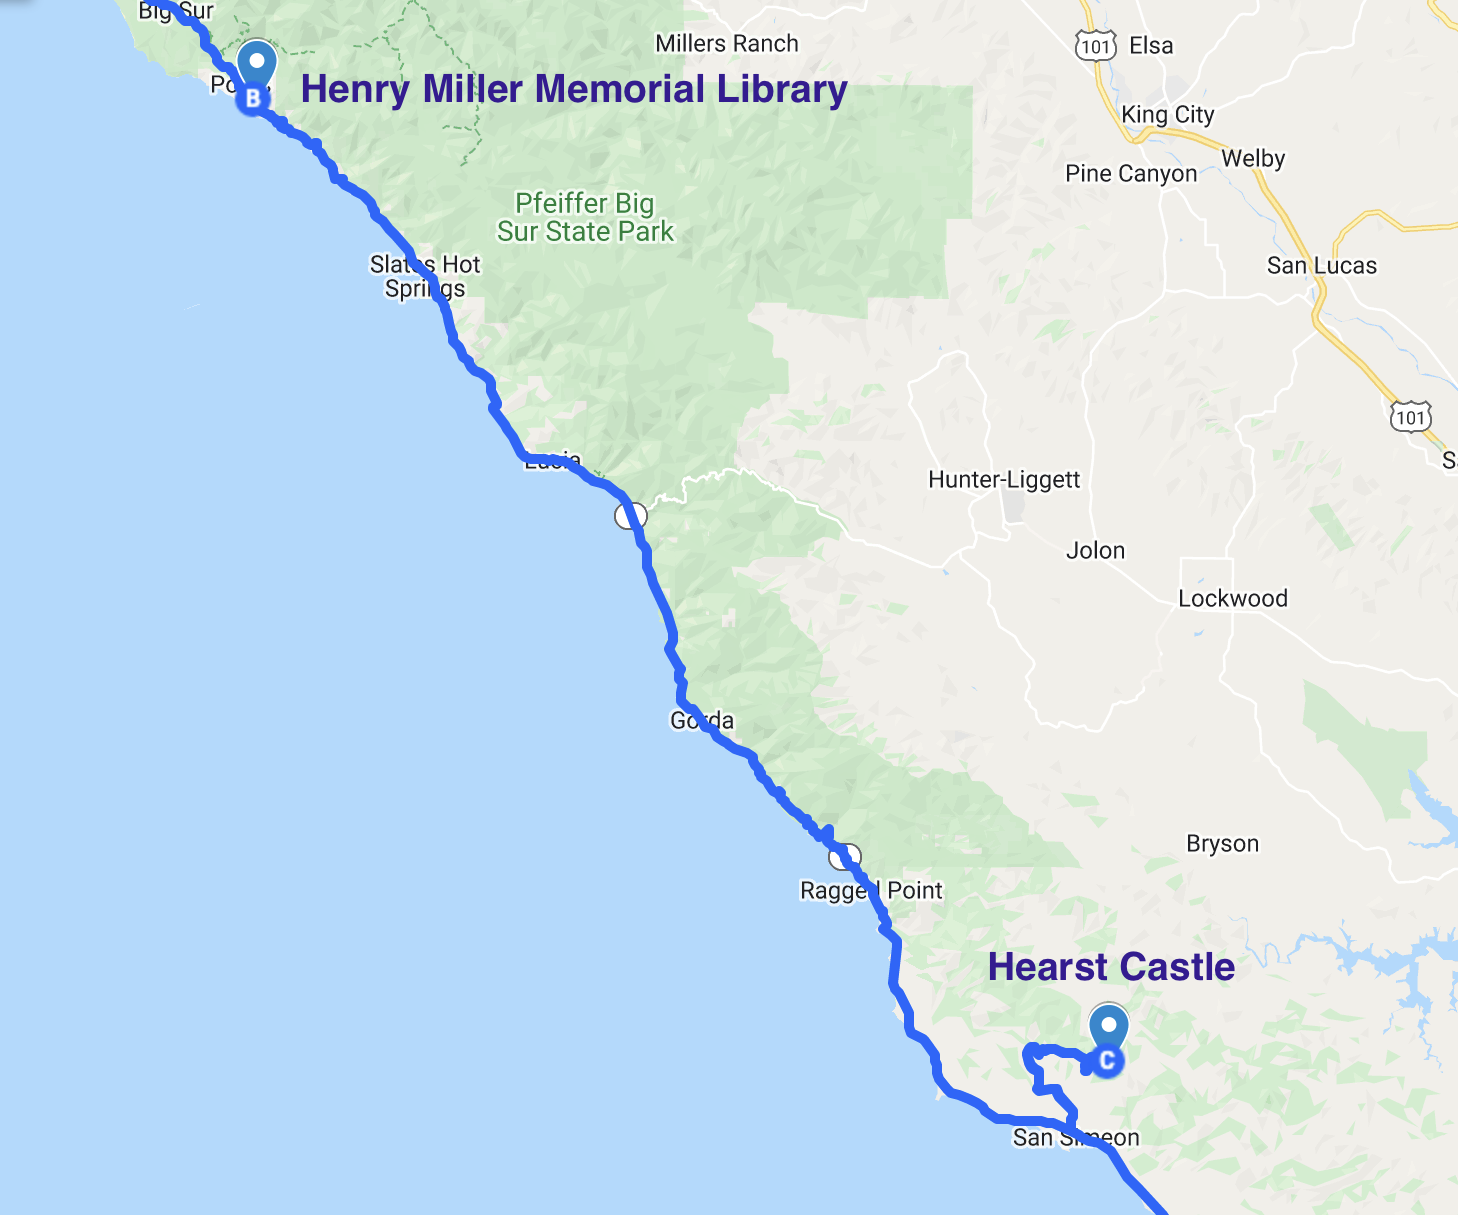 map of literary stops in big sur california